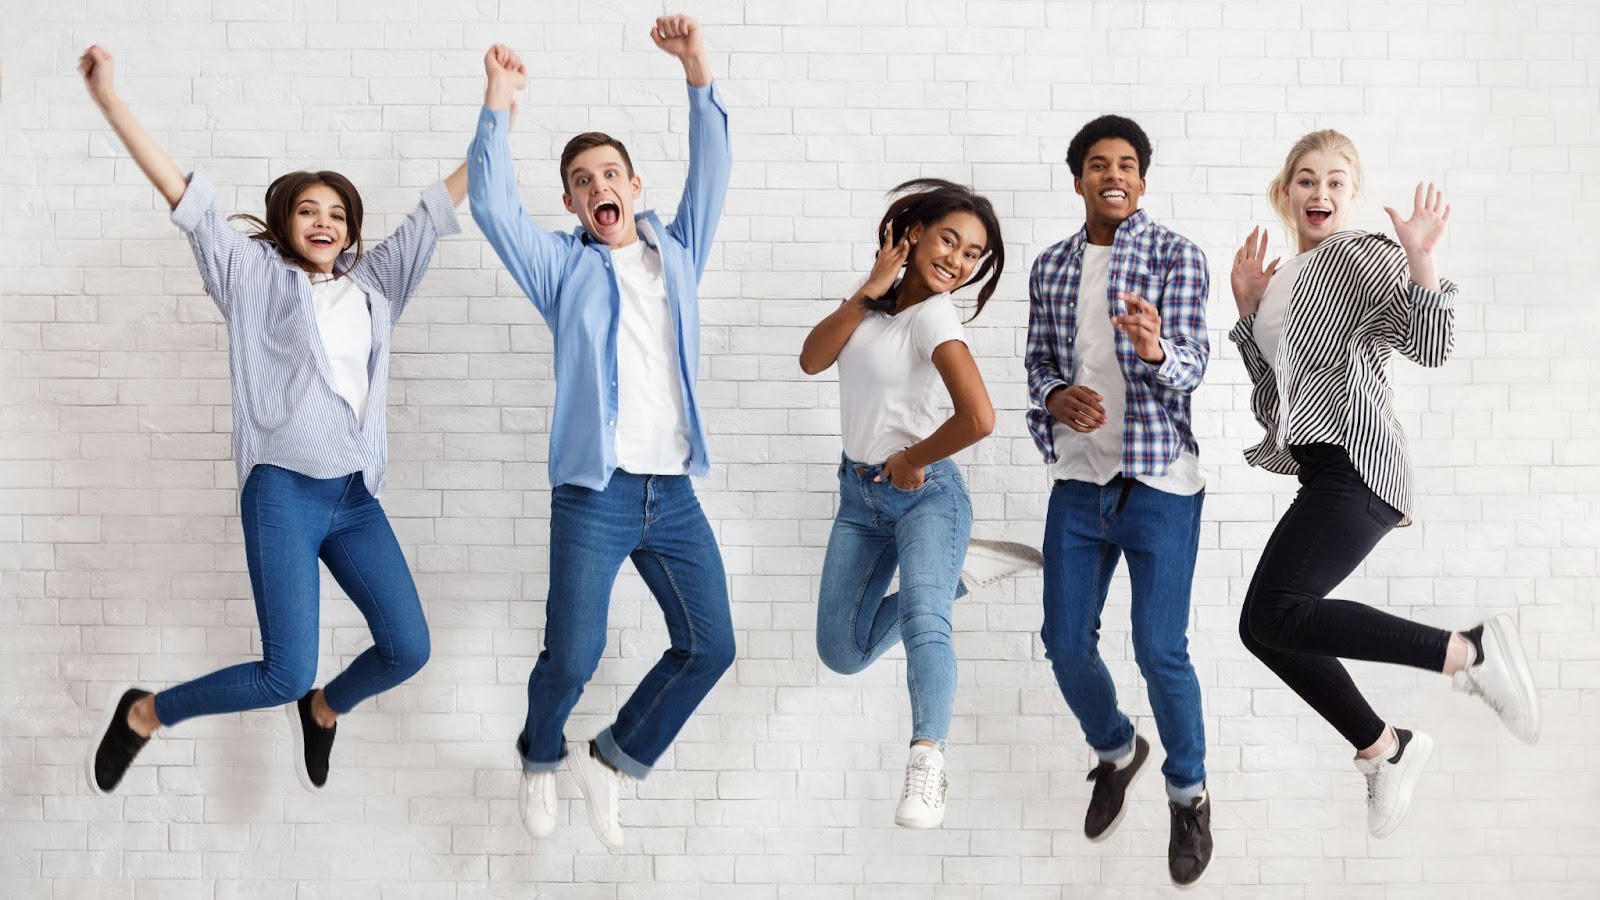 Five young people happily jumping in the air